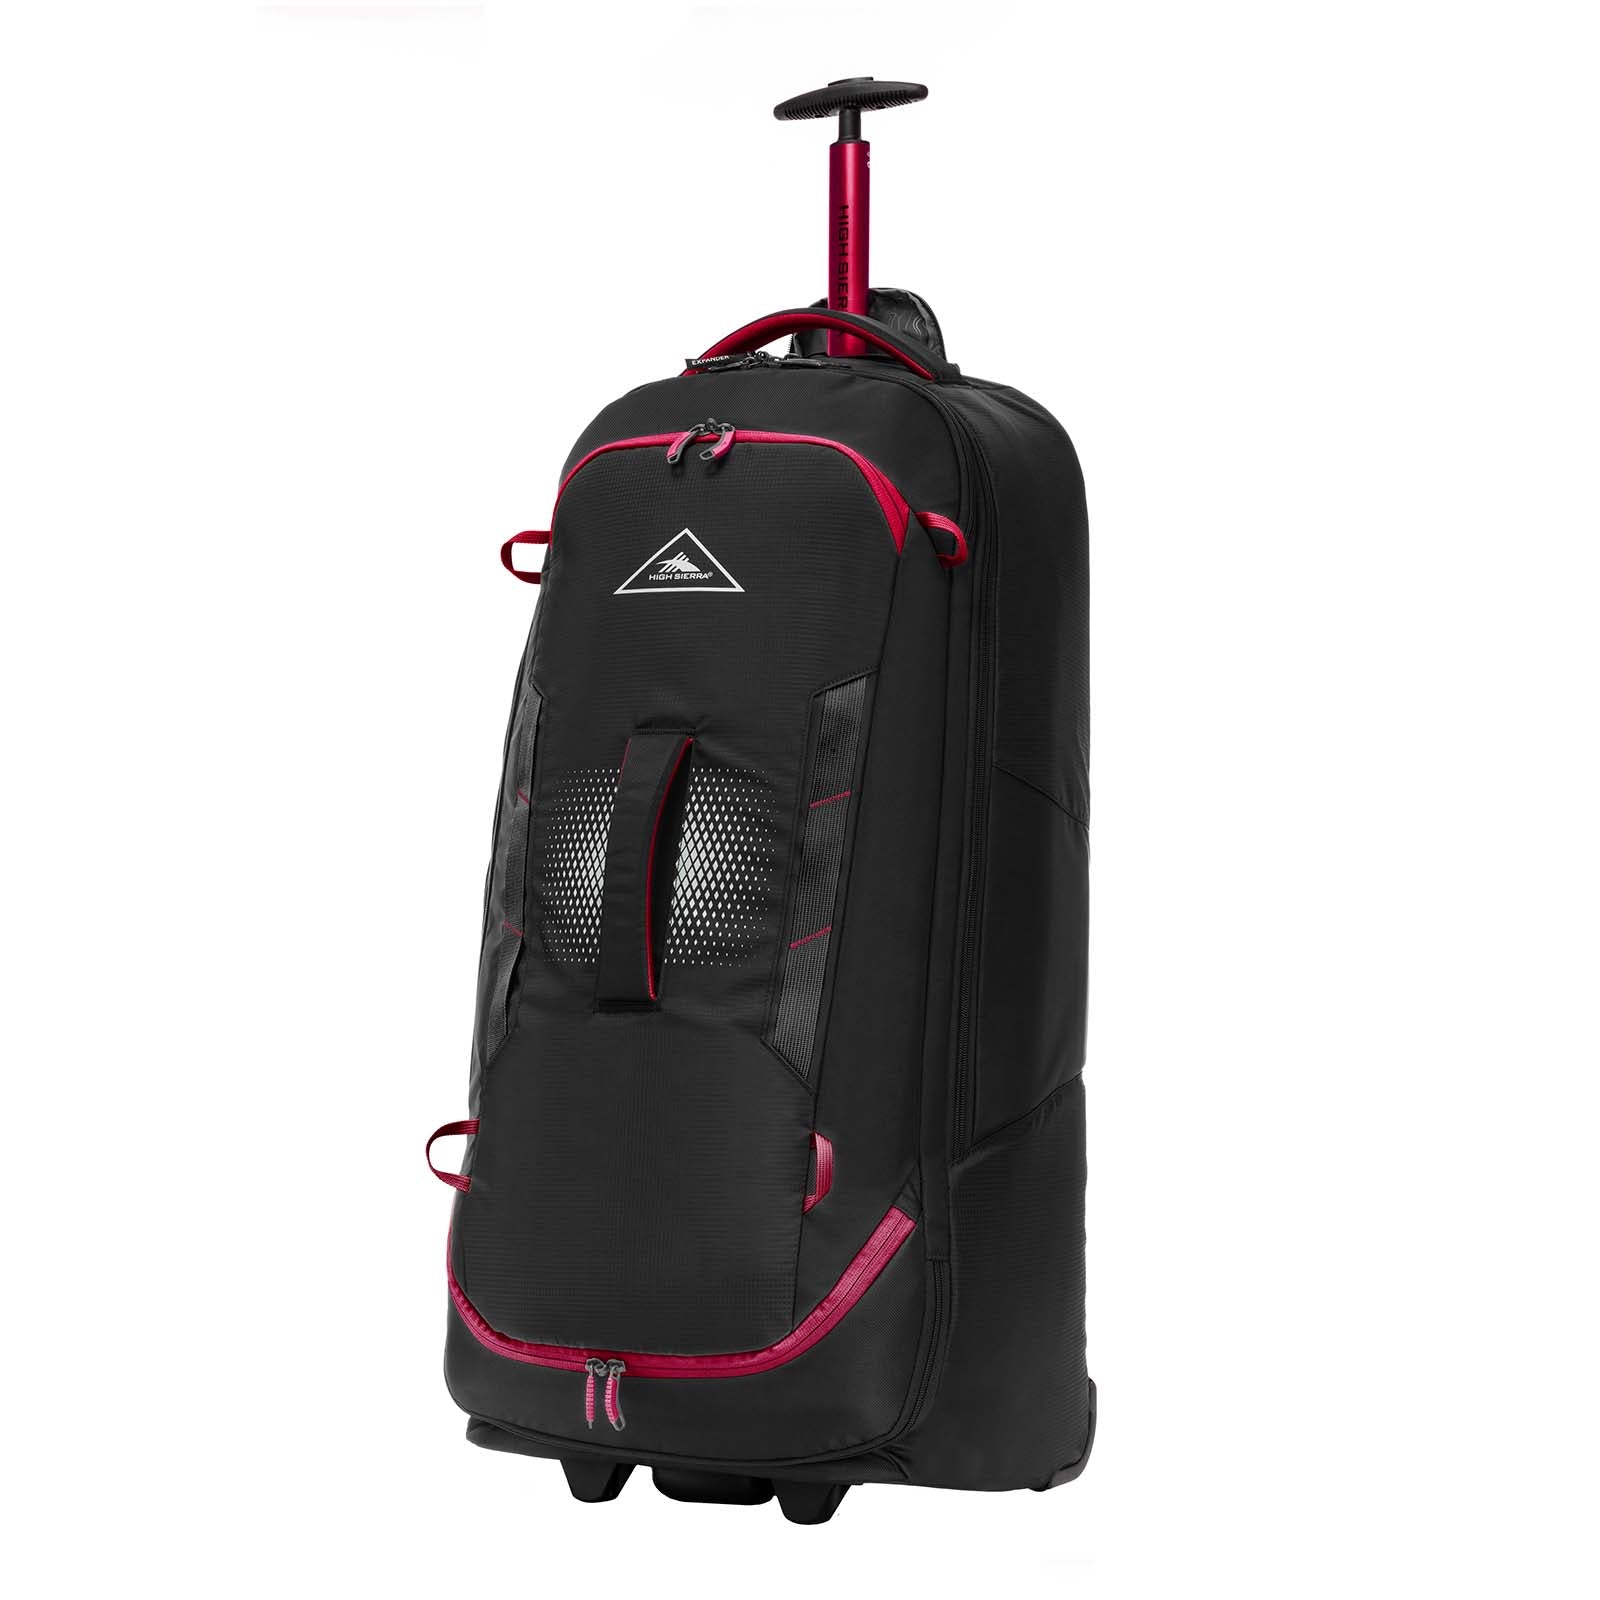    High_Sierra_Composite_V4_84cm_Carry-On_Wheeled_Duffel_Black_Red_Front